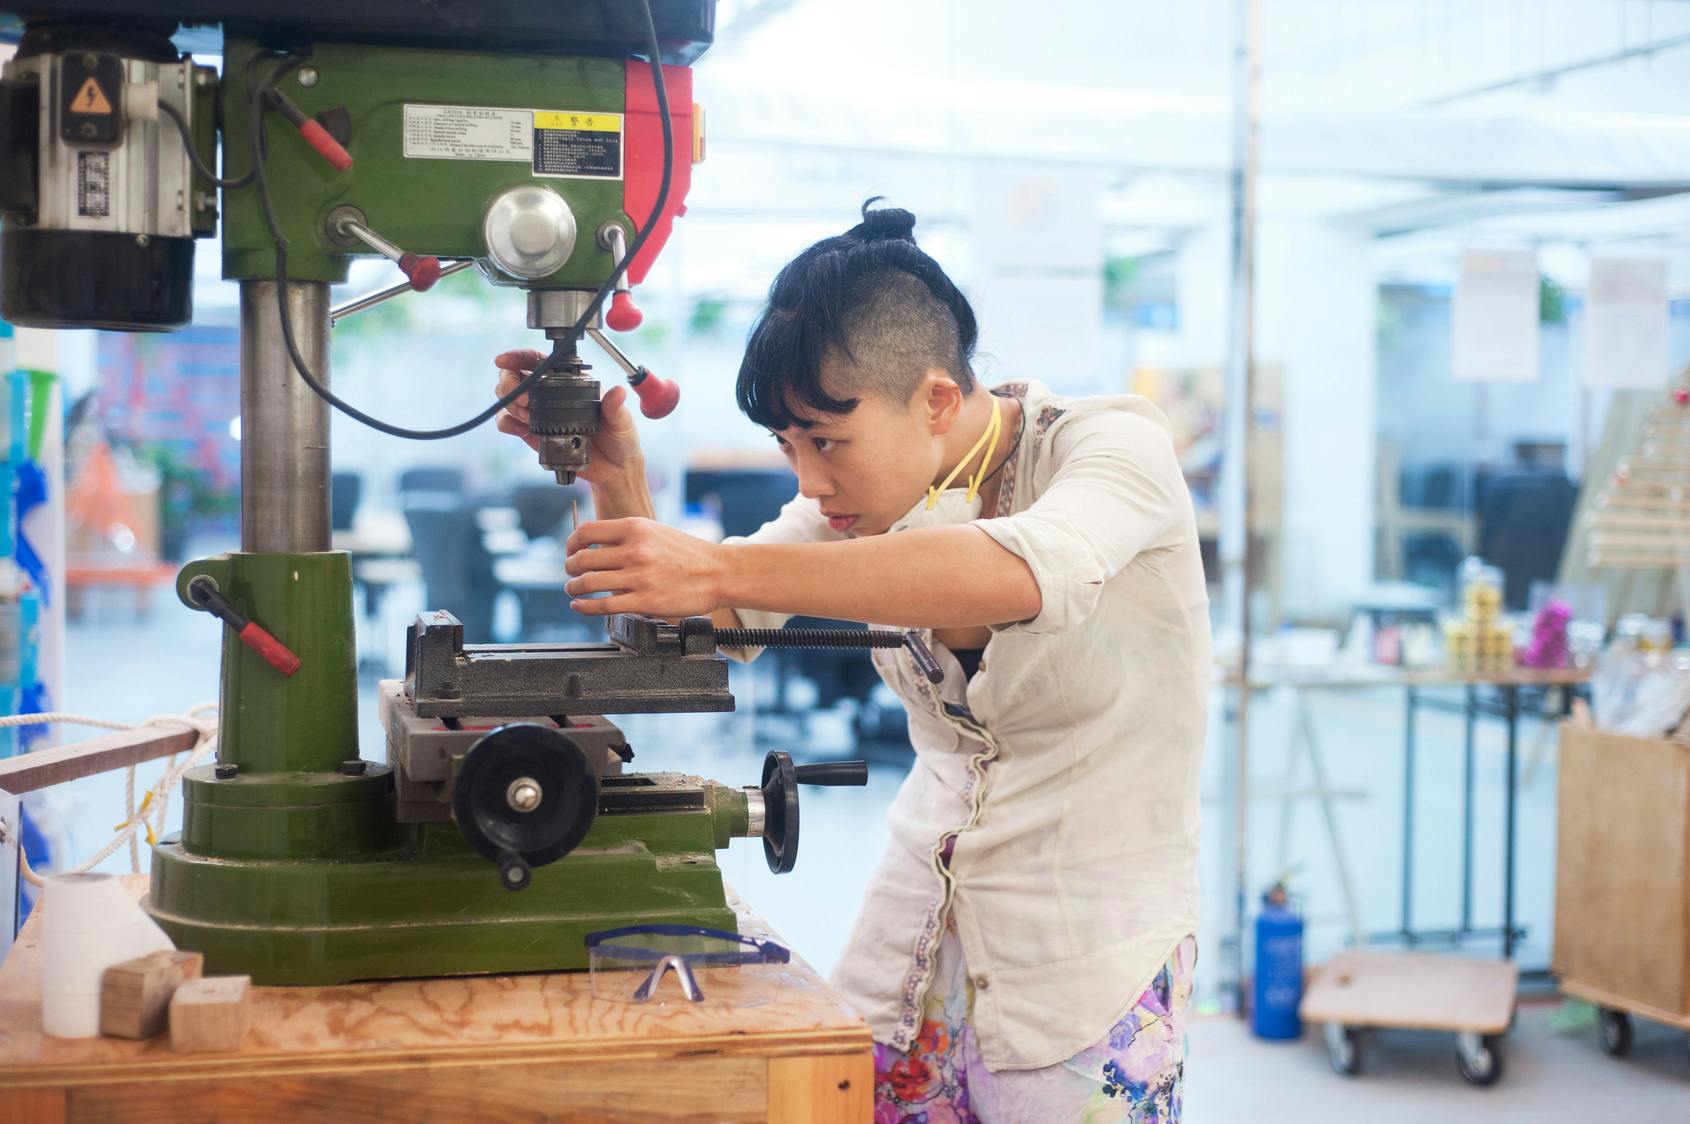 A makerspace could spark innovation and drive artist advancement